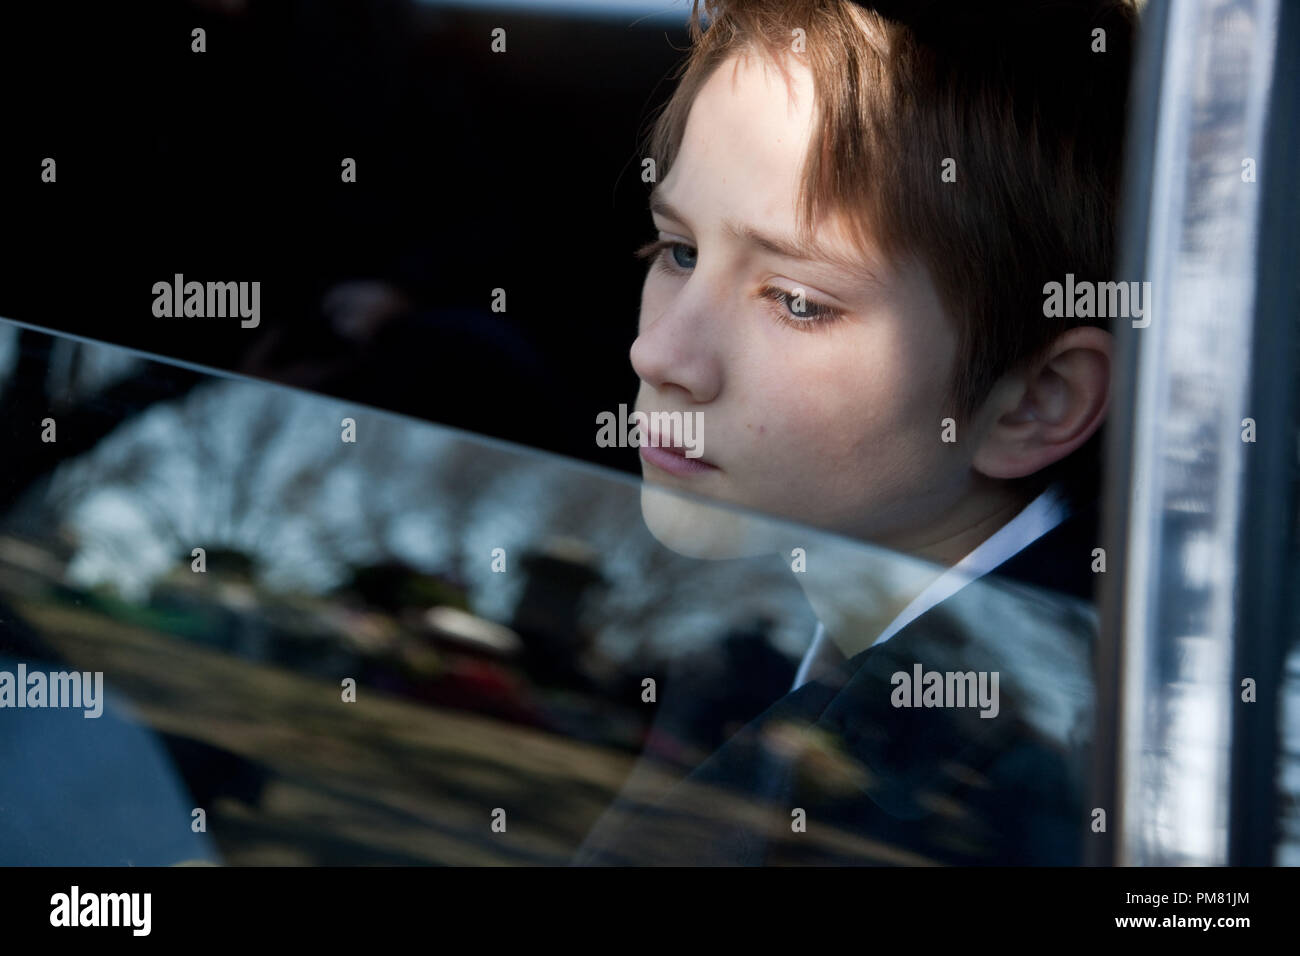 THOMAS HORN as Oskar Schell in Warner Brothers Pictures drama EXTREMELY LOUD & INCREDIBLY CLOSE, a Warner Bros. Pictures release. Stock Photo